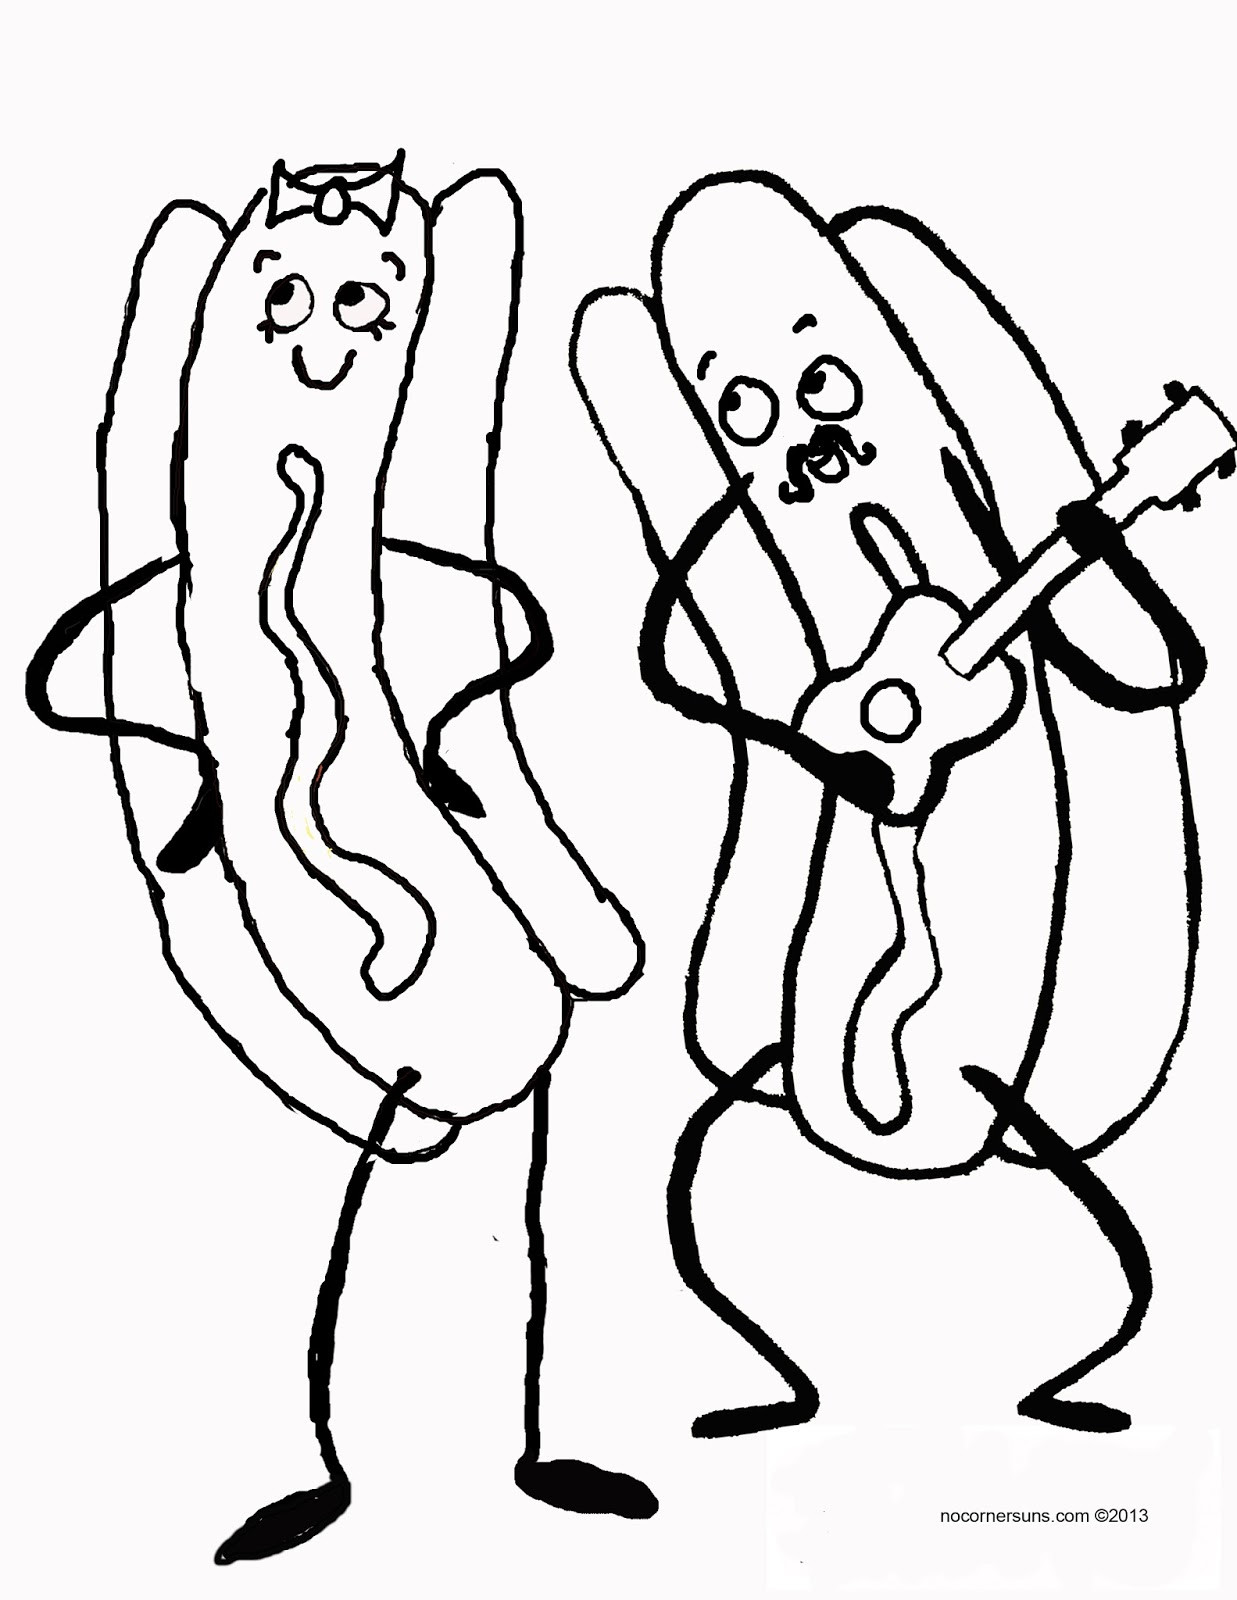 Dog Coloring Pages For Boys
 No Corner Suns Girl and Boy Hot Dog Coloring Page